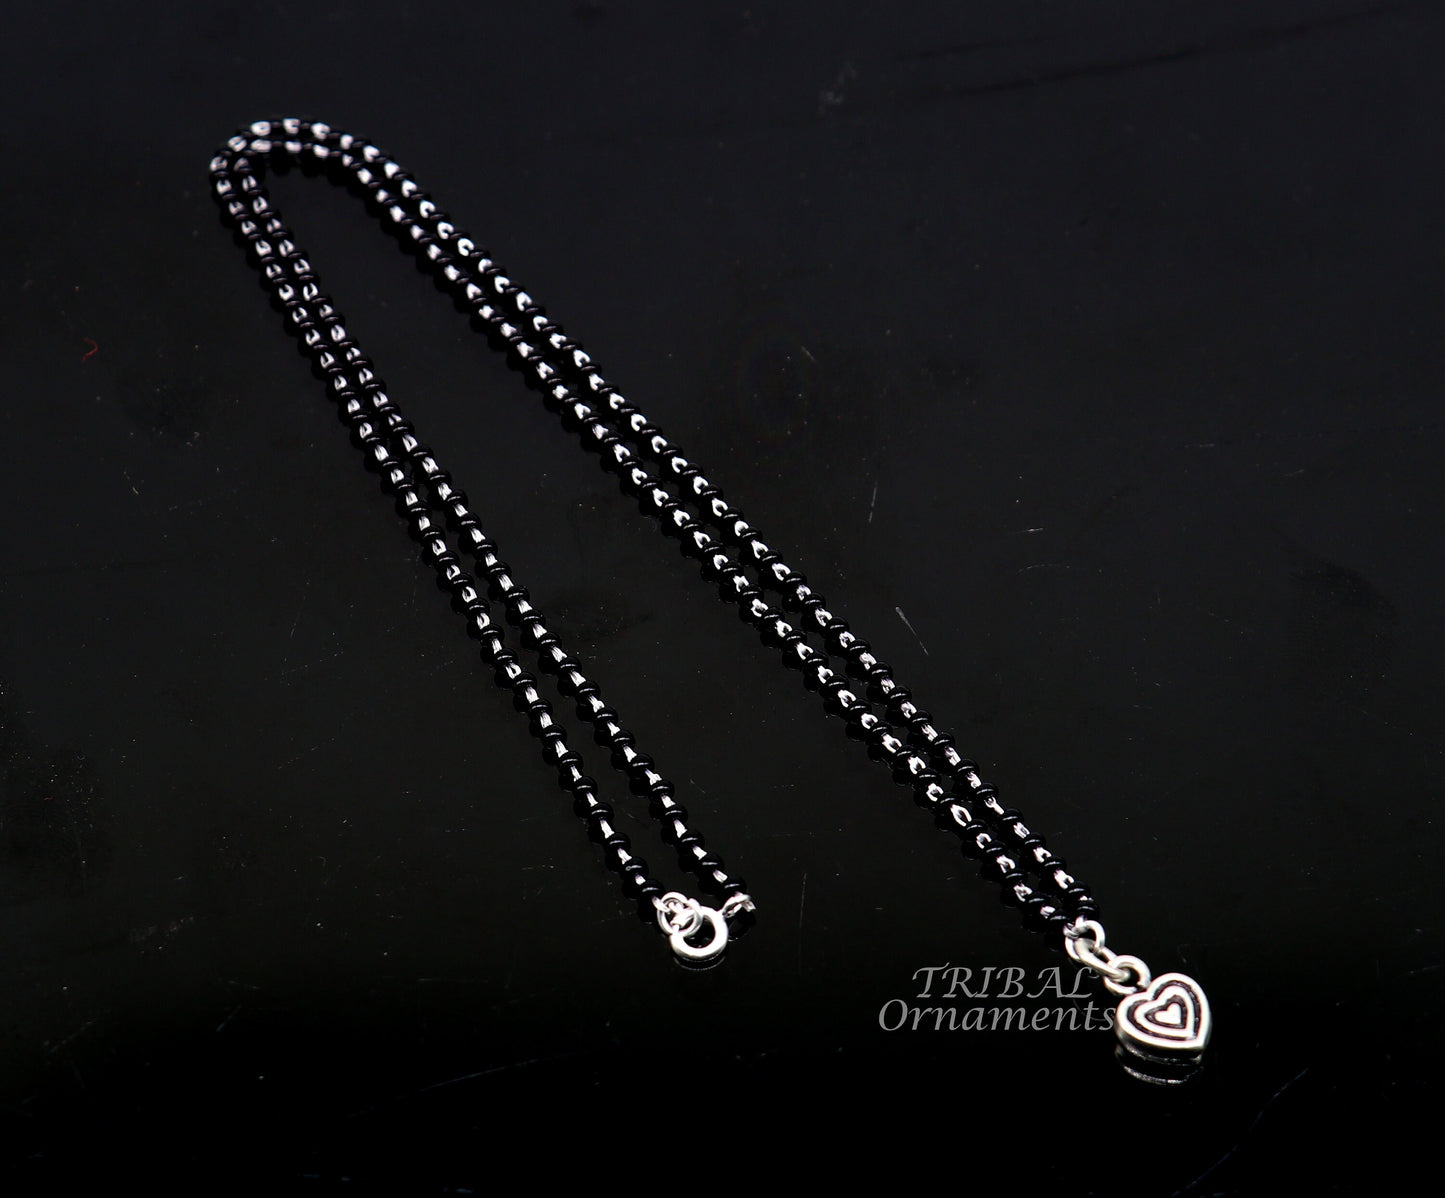 Pure 925 sterling silver black beads chain necklace, vintage Style pendant, traditional style brides Mangalsutra necklace set502 - TRIBAL ORNAMENTS